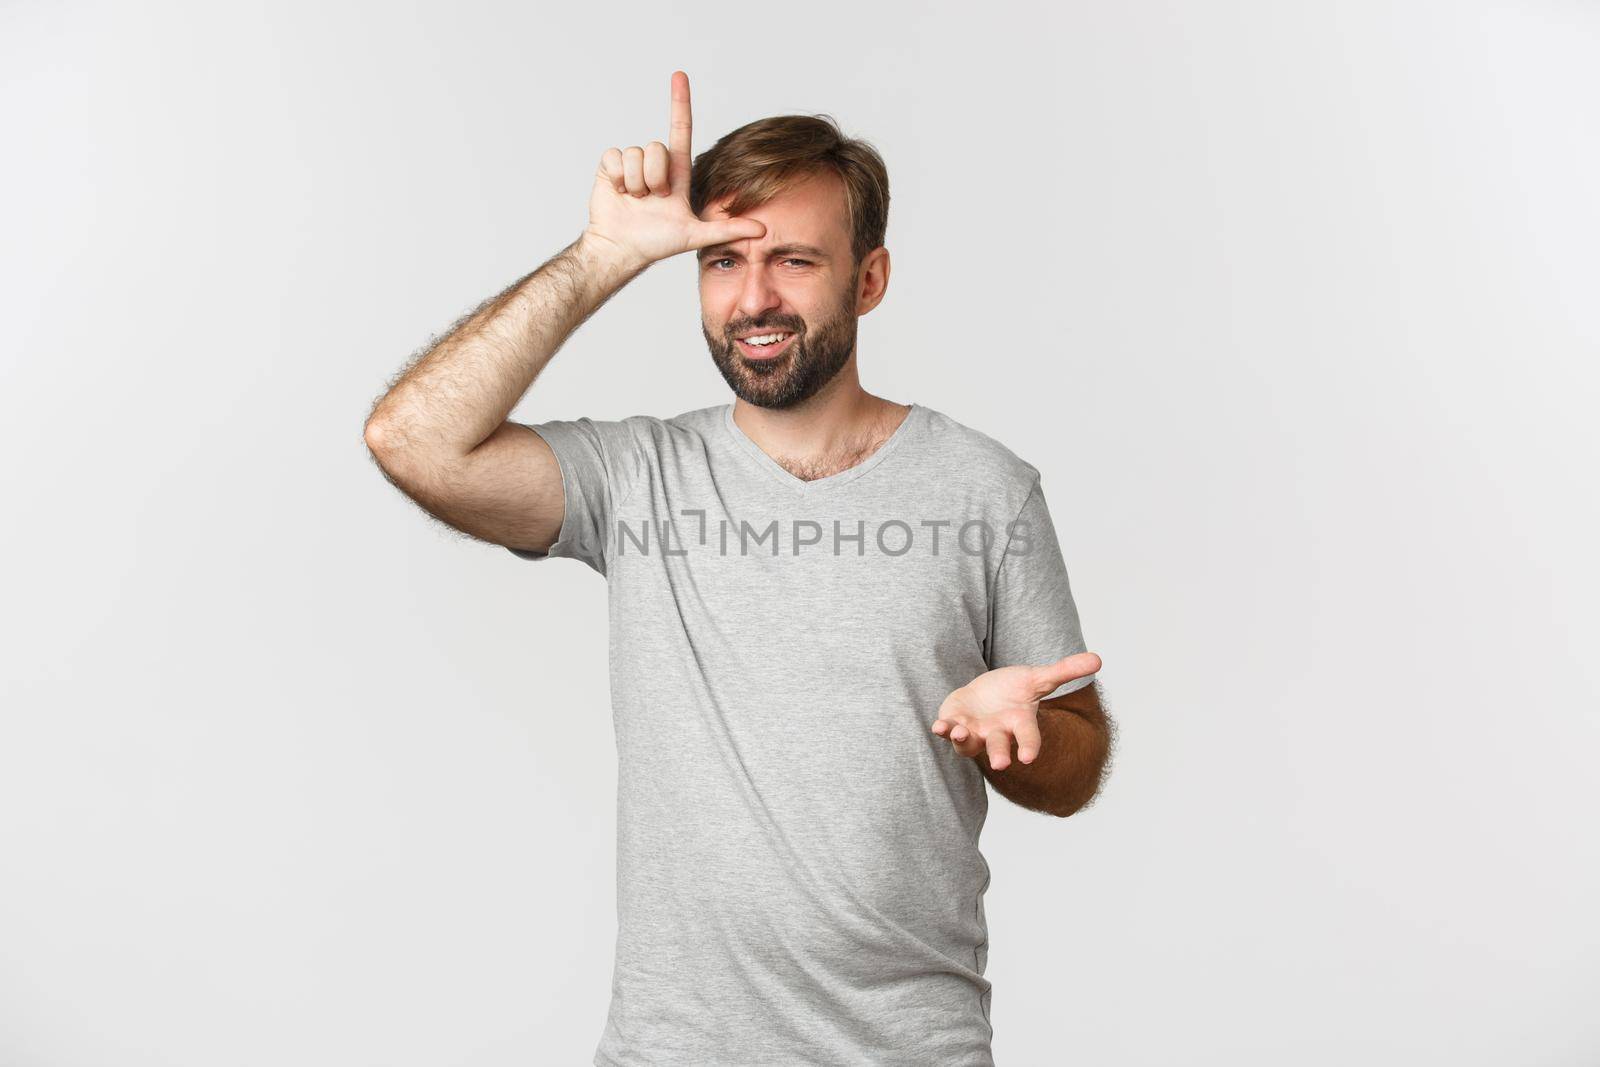 Portrait of arrogant man in gray t-shirt, mocking person who lost, showing loser sign on forehead and looking with dismay, standing over white background.